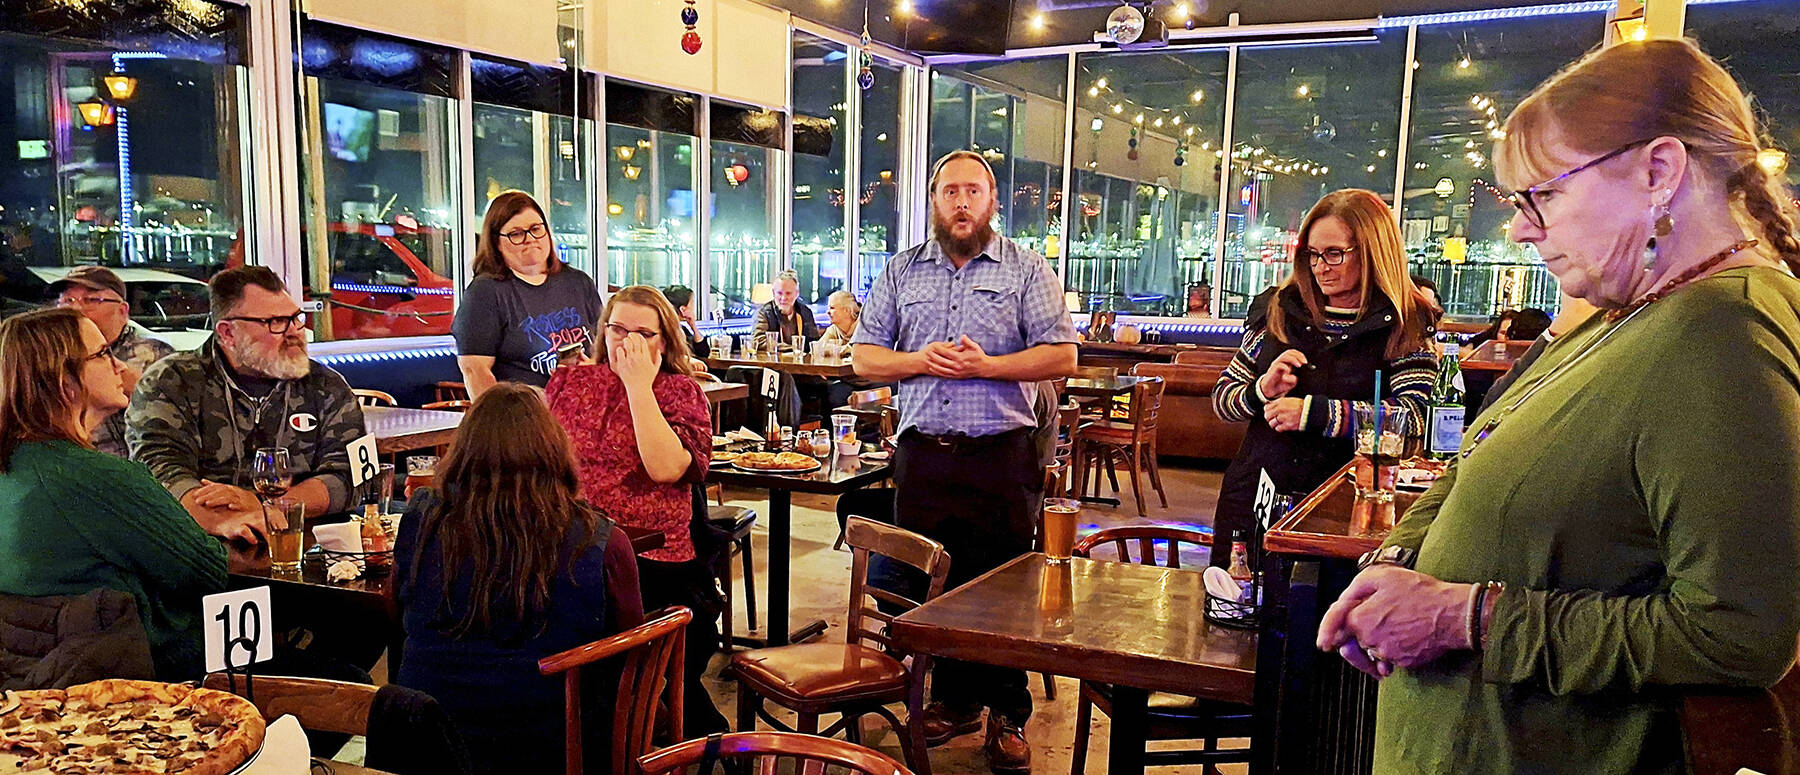 Elisha Meyer/Kitsap News Group
Gerry Austin, center, speaks with fellow South Kitsap School Supporters at Damn Fine Pizza minutes before results were announced.